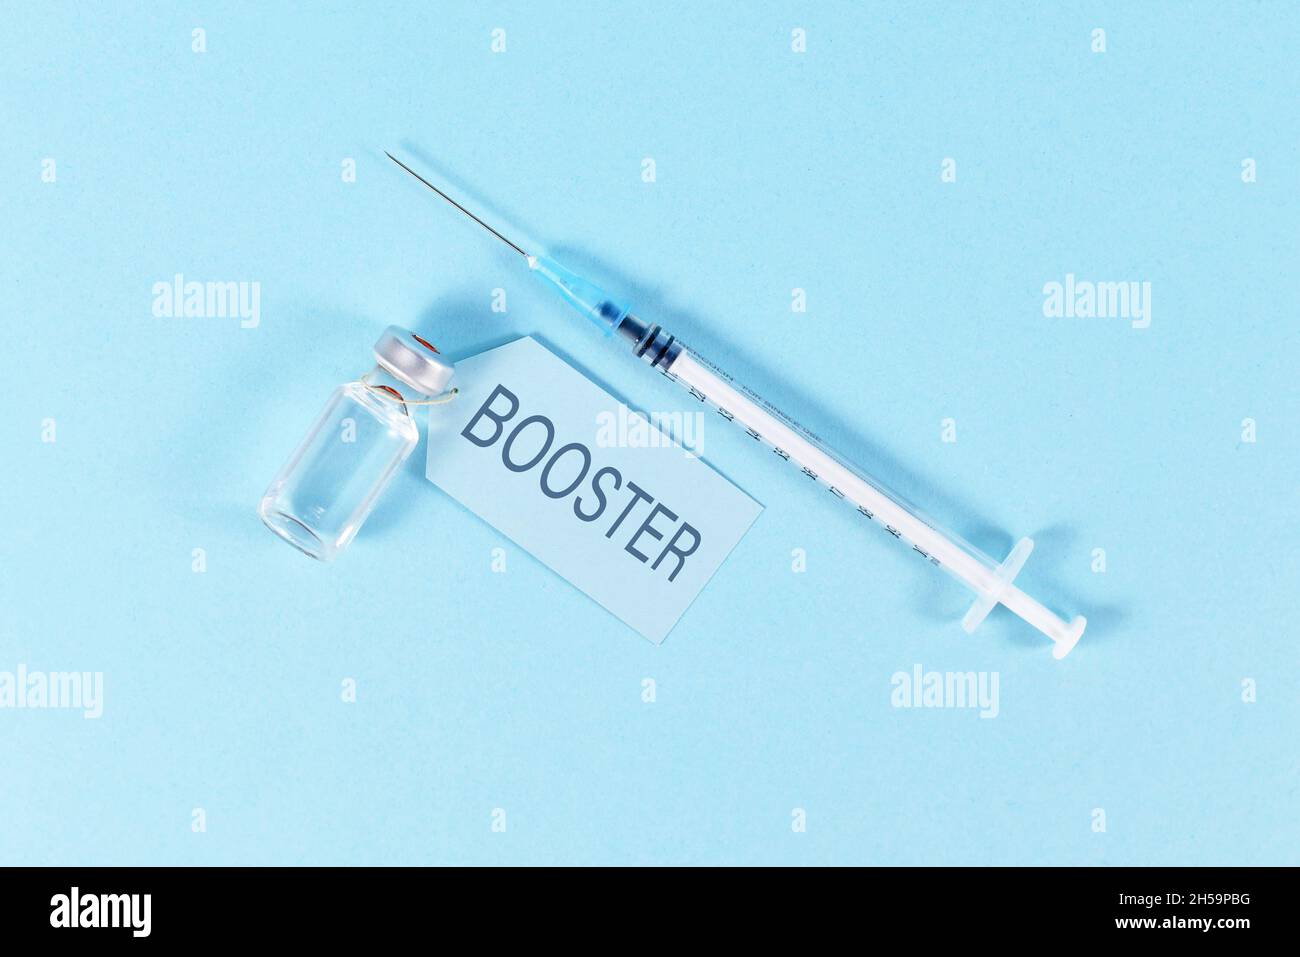 Concept for Corina virus booster vaccination with vial and syringe on blue background Stock Photo